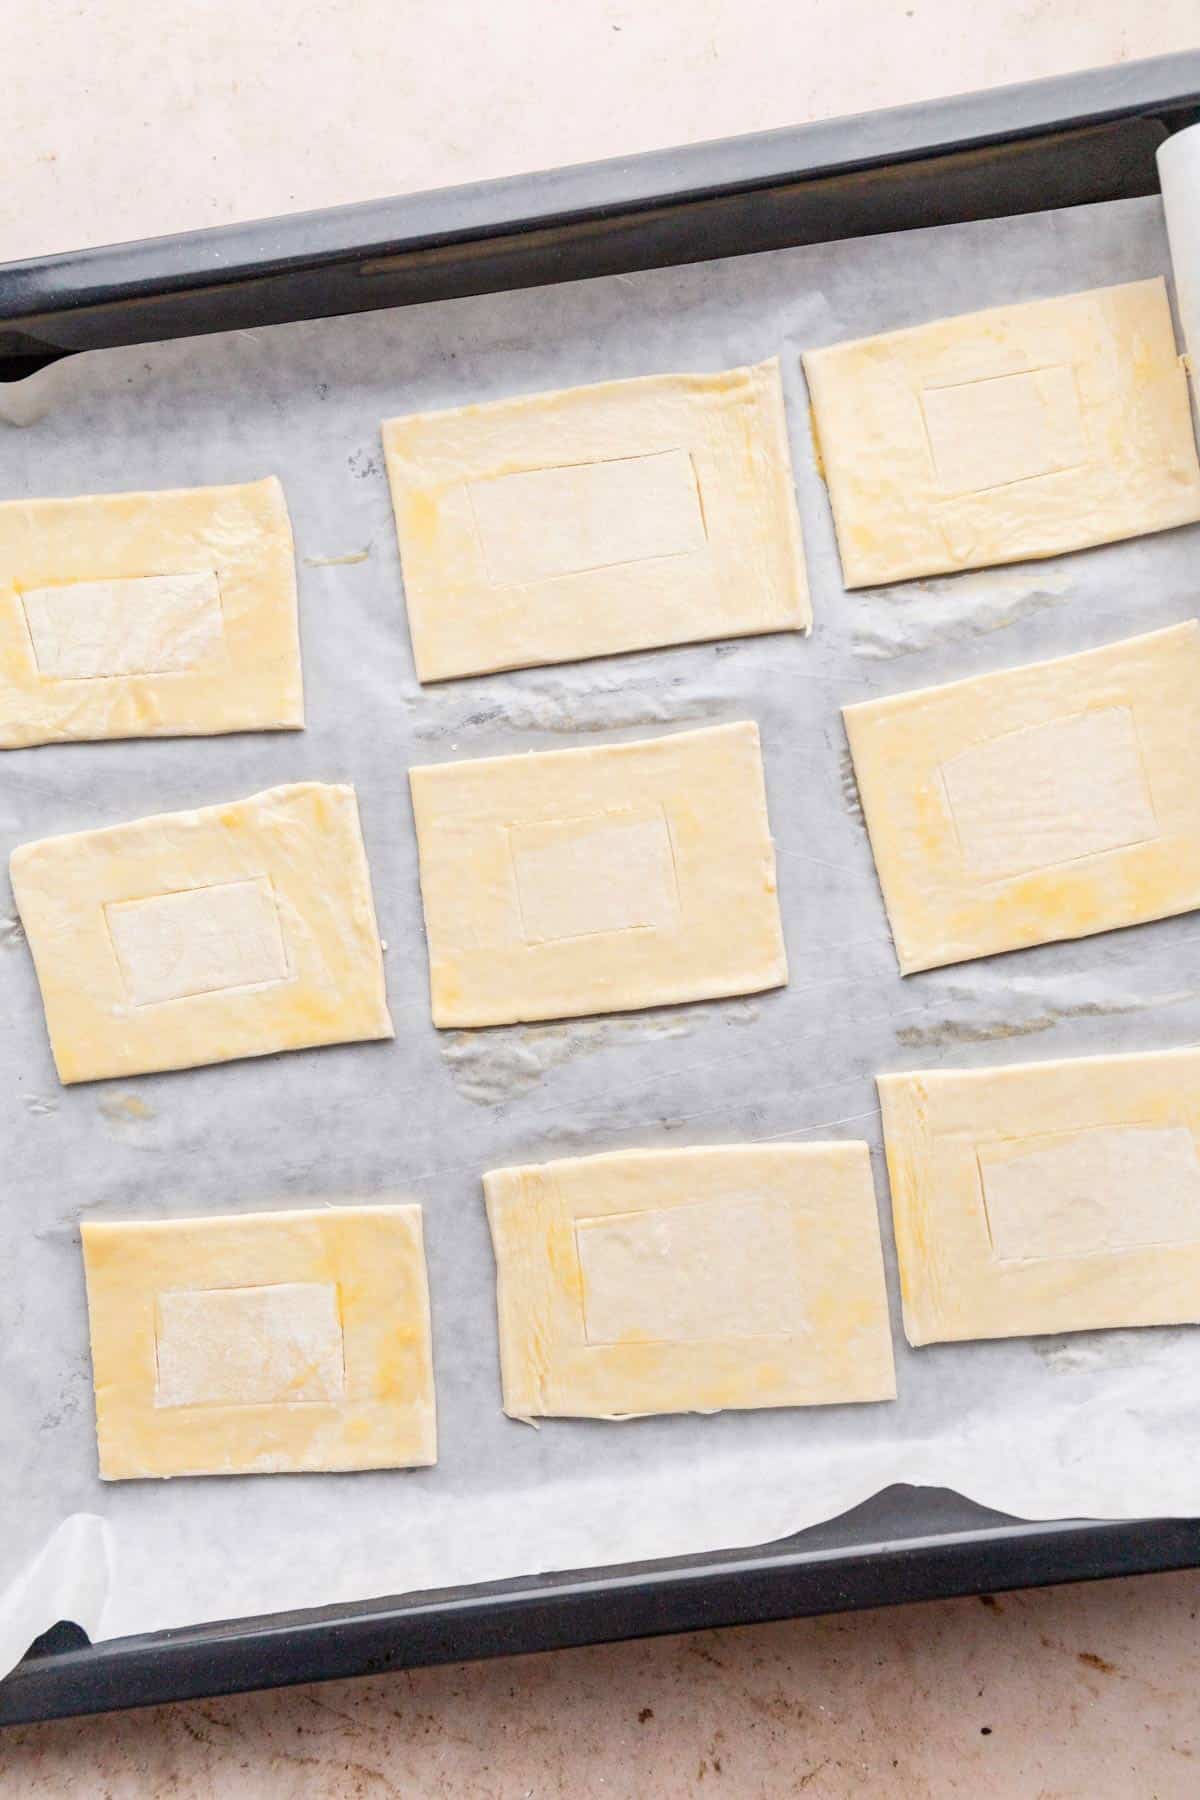 puff pastry cut into rectangles.